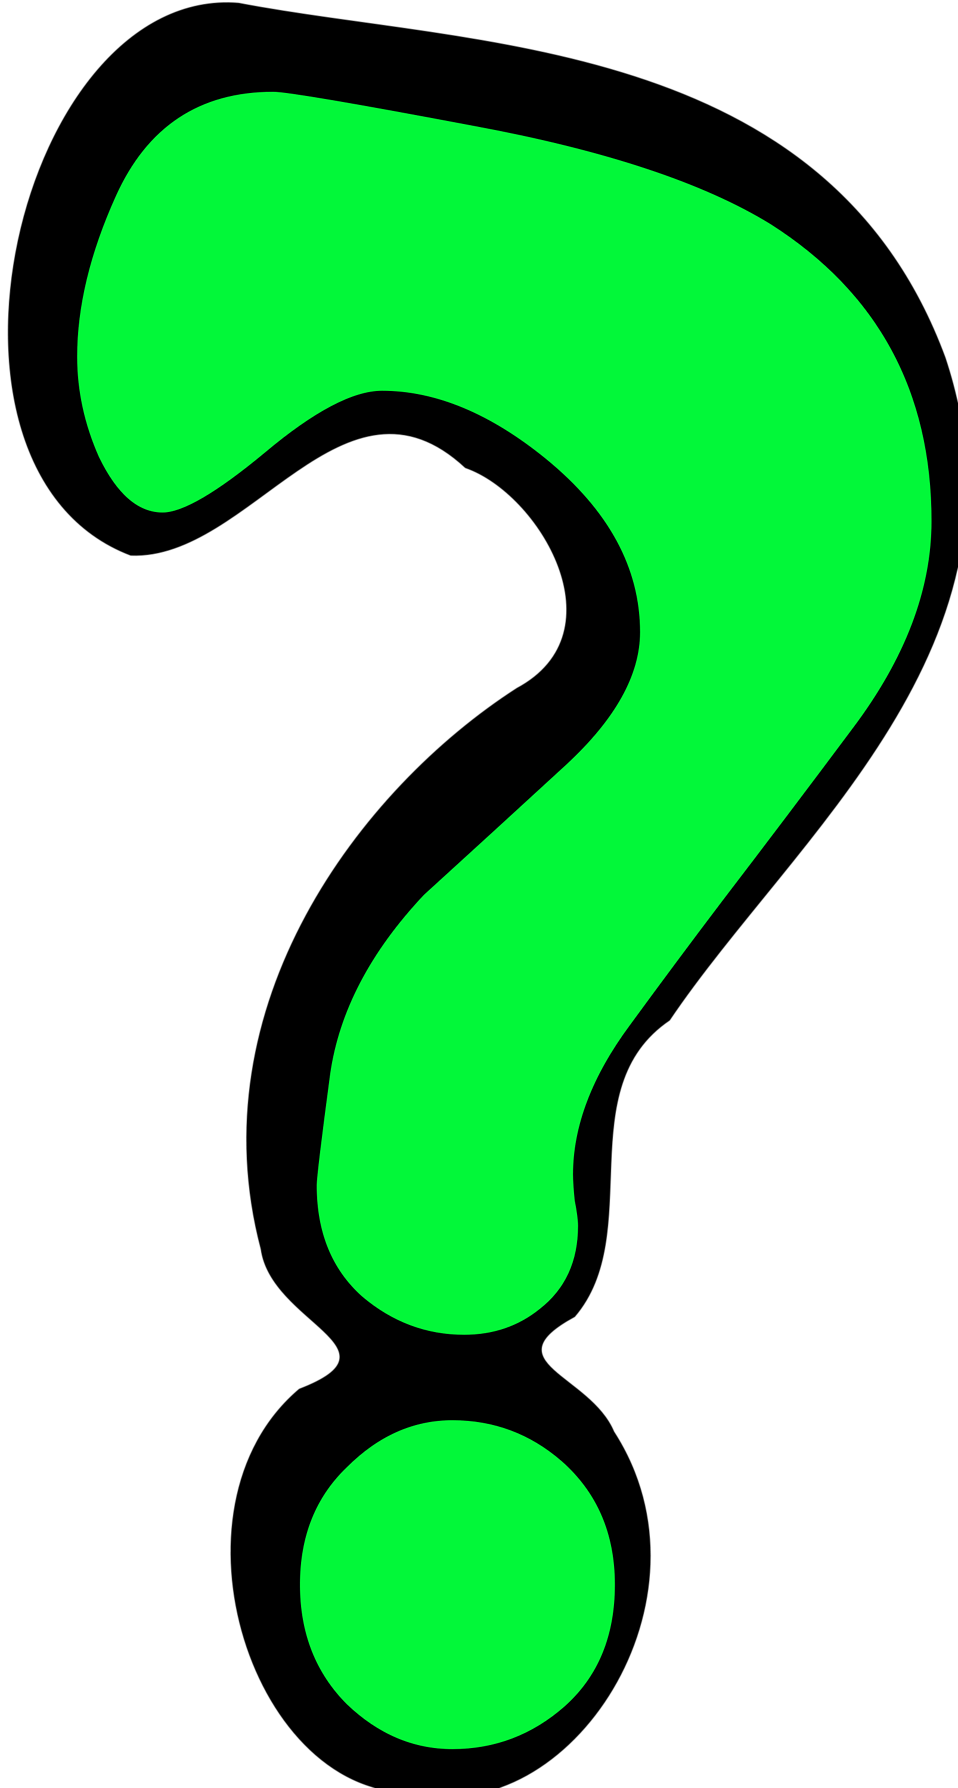 clipart image of question mark - photo #21